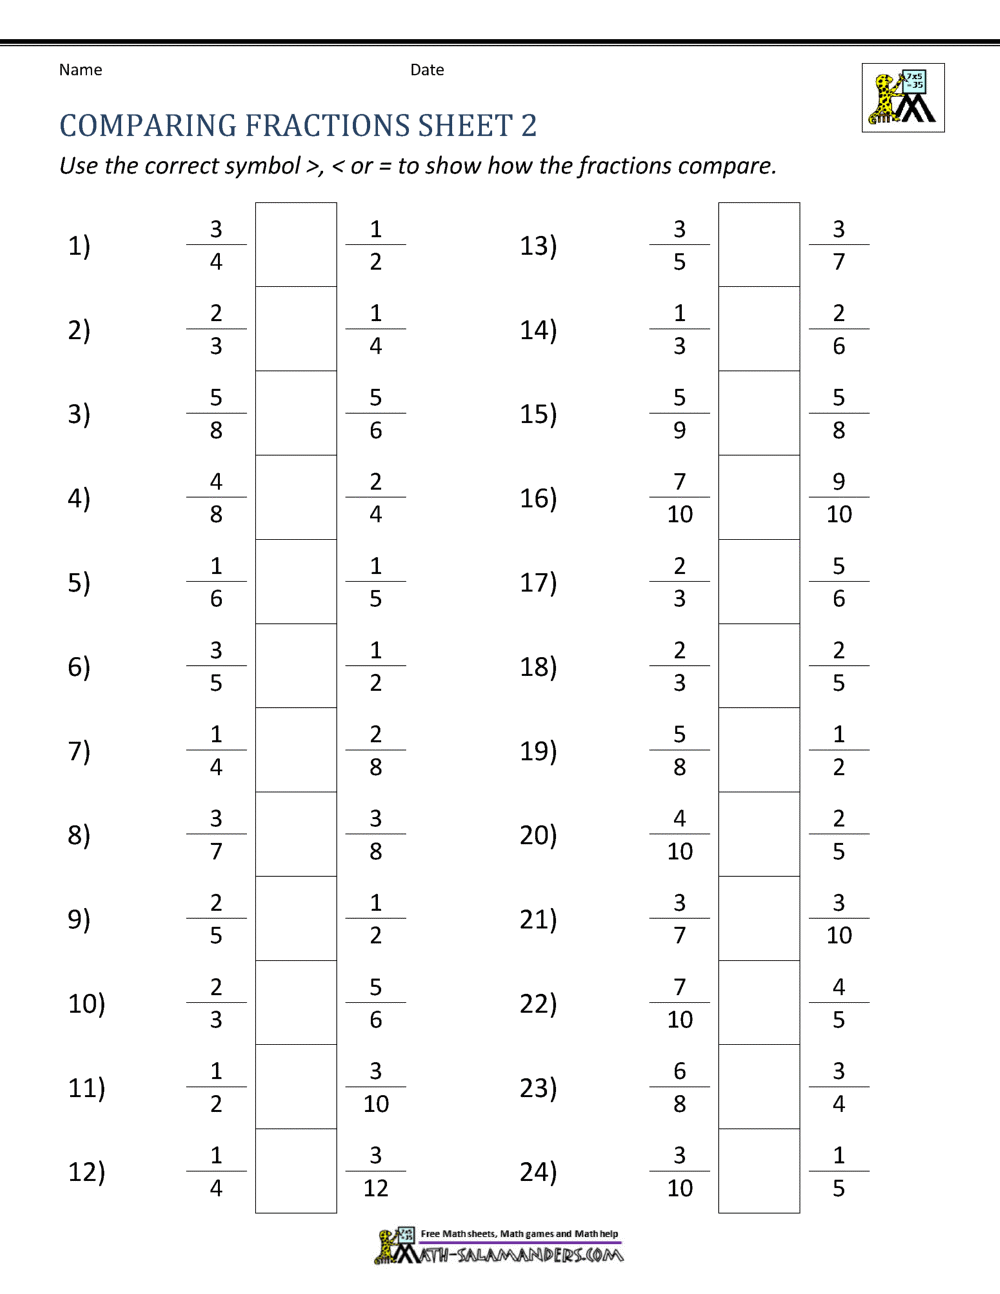 equivalent-fractions-worksheet-answers-tutore-org-master-of-documents